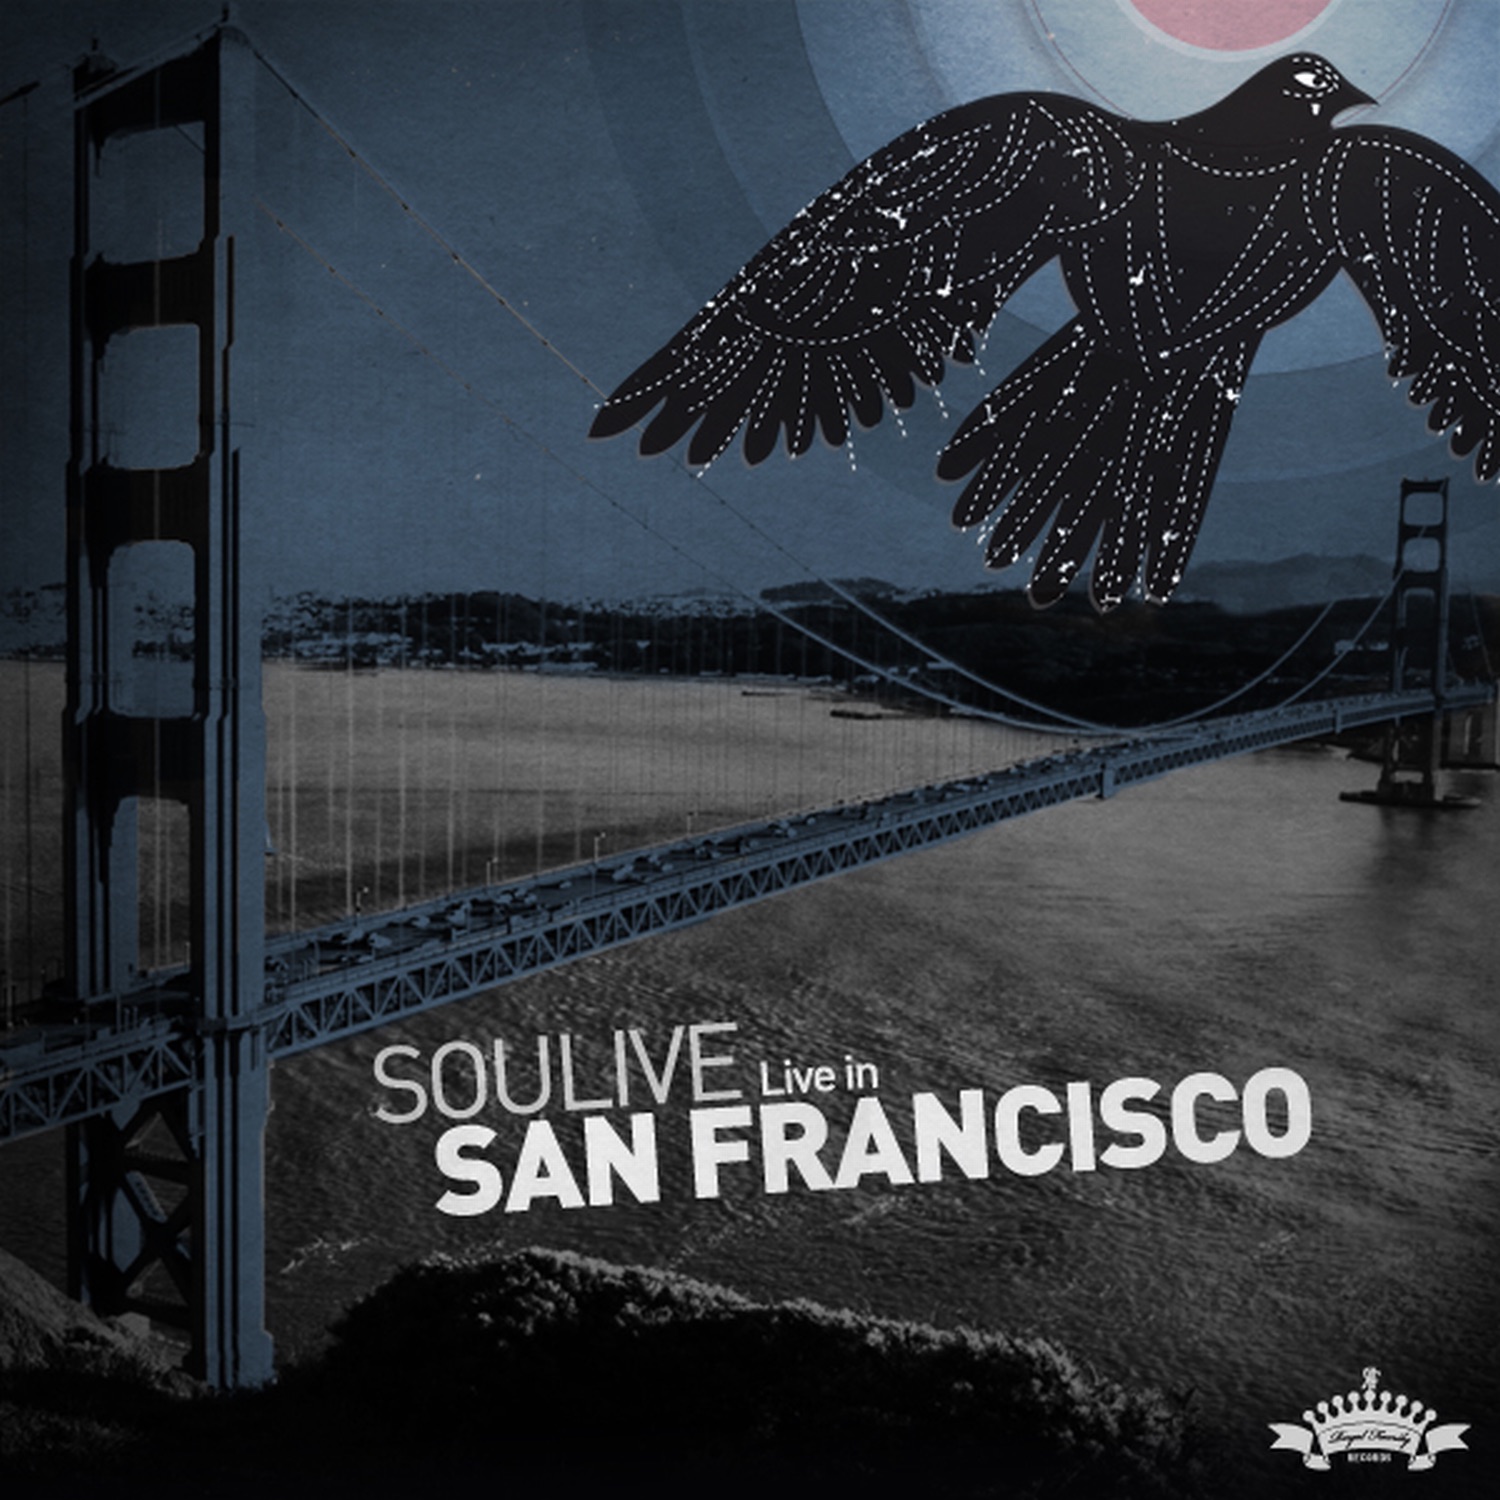 Art for Flurries by Soulive